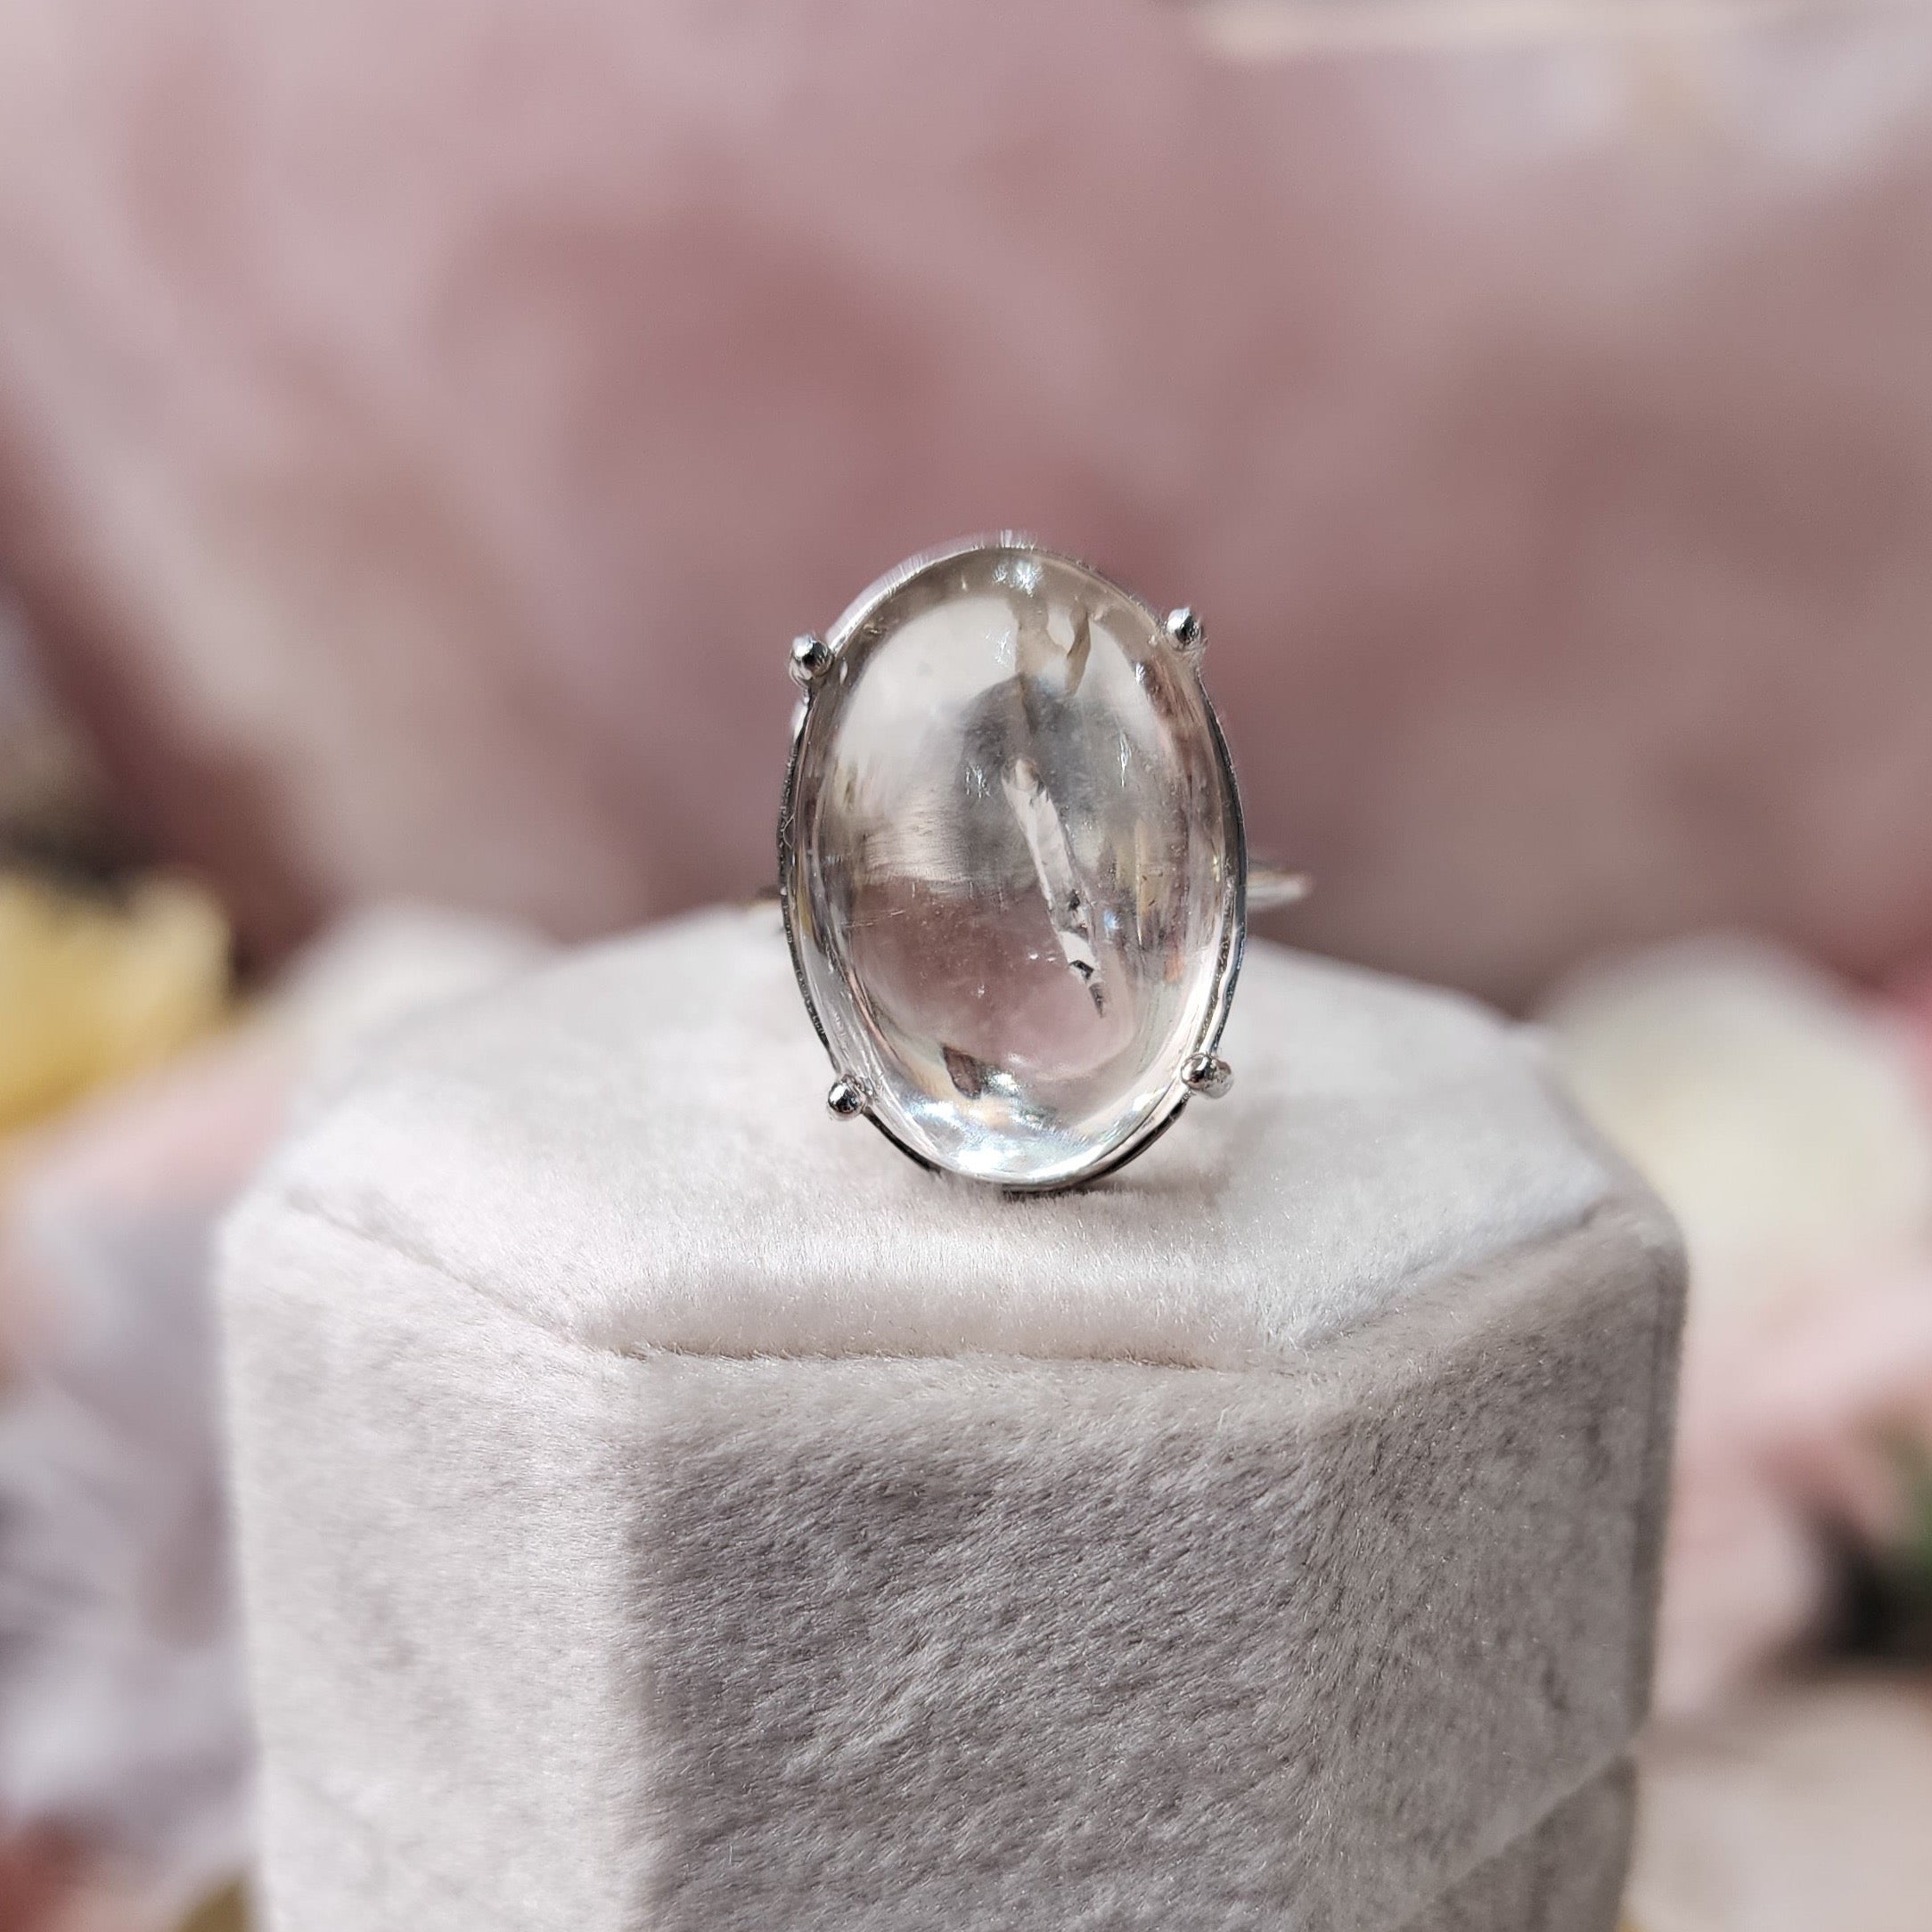 Enhydro Quartz Adjustable Ring .925 Silver for Powerful Healing and Balance